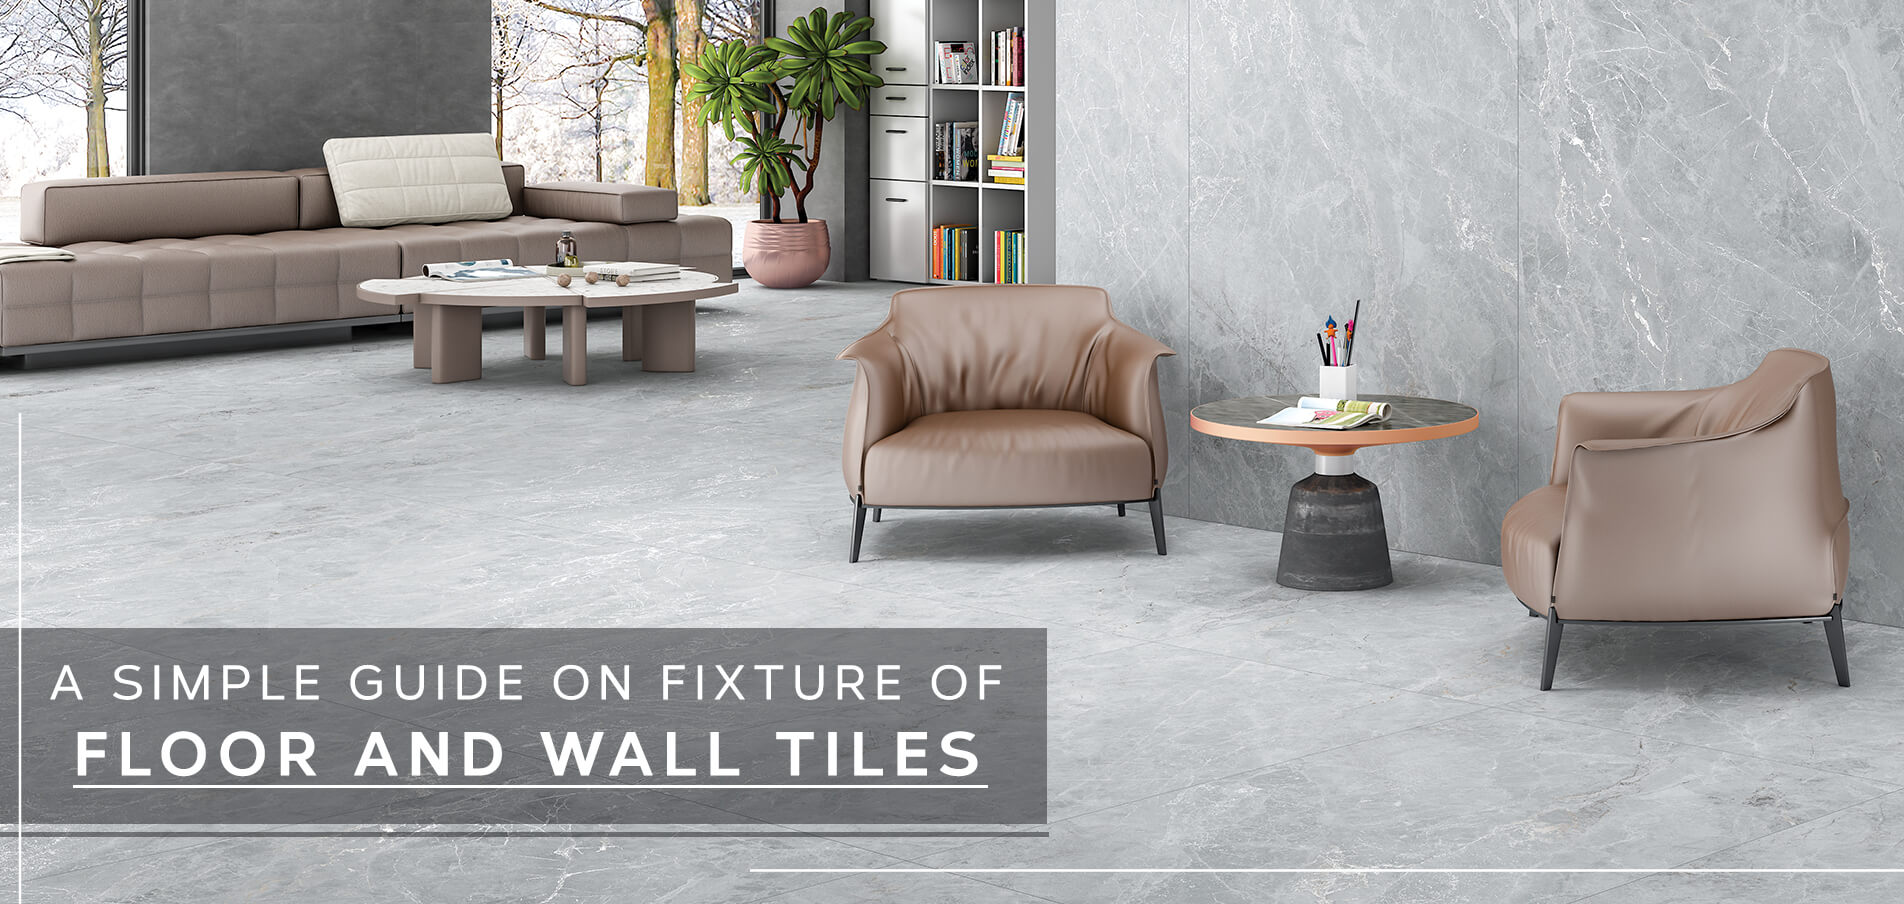 A simple guide on fixture of floor and wall tiles